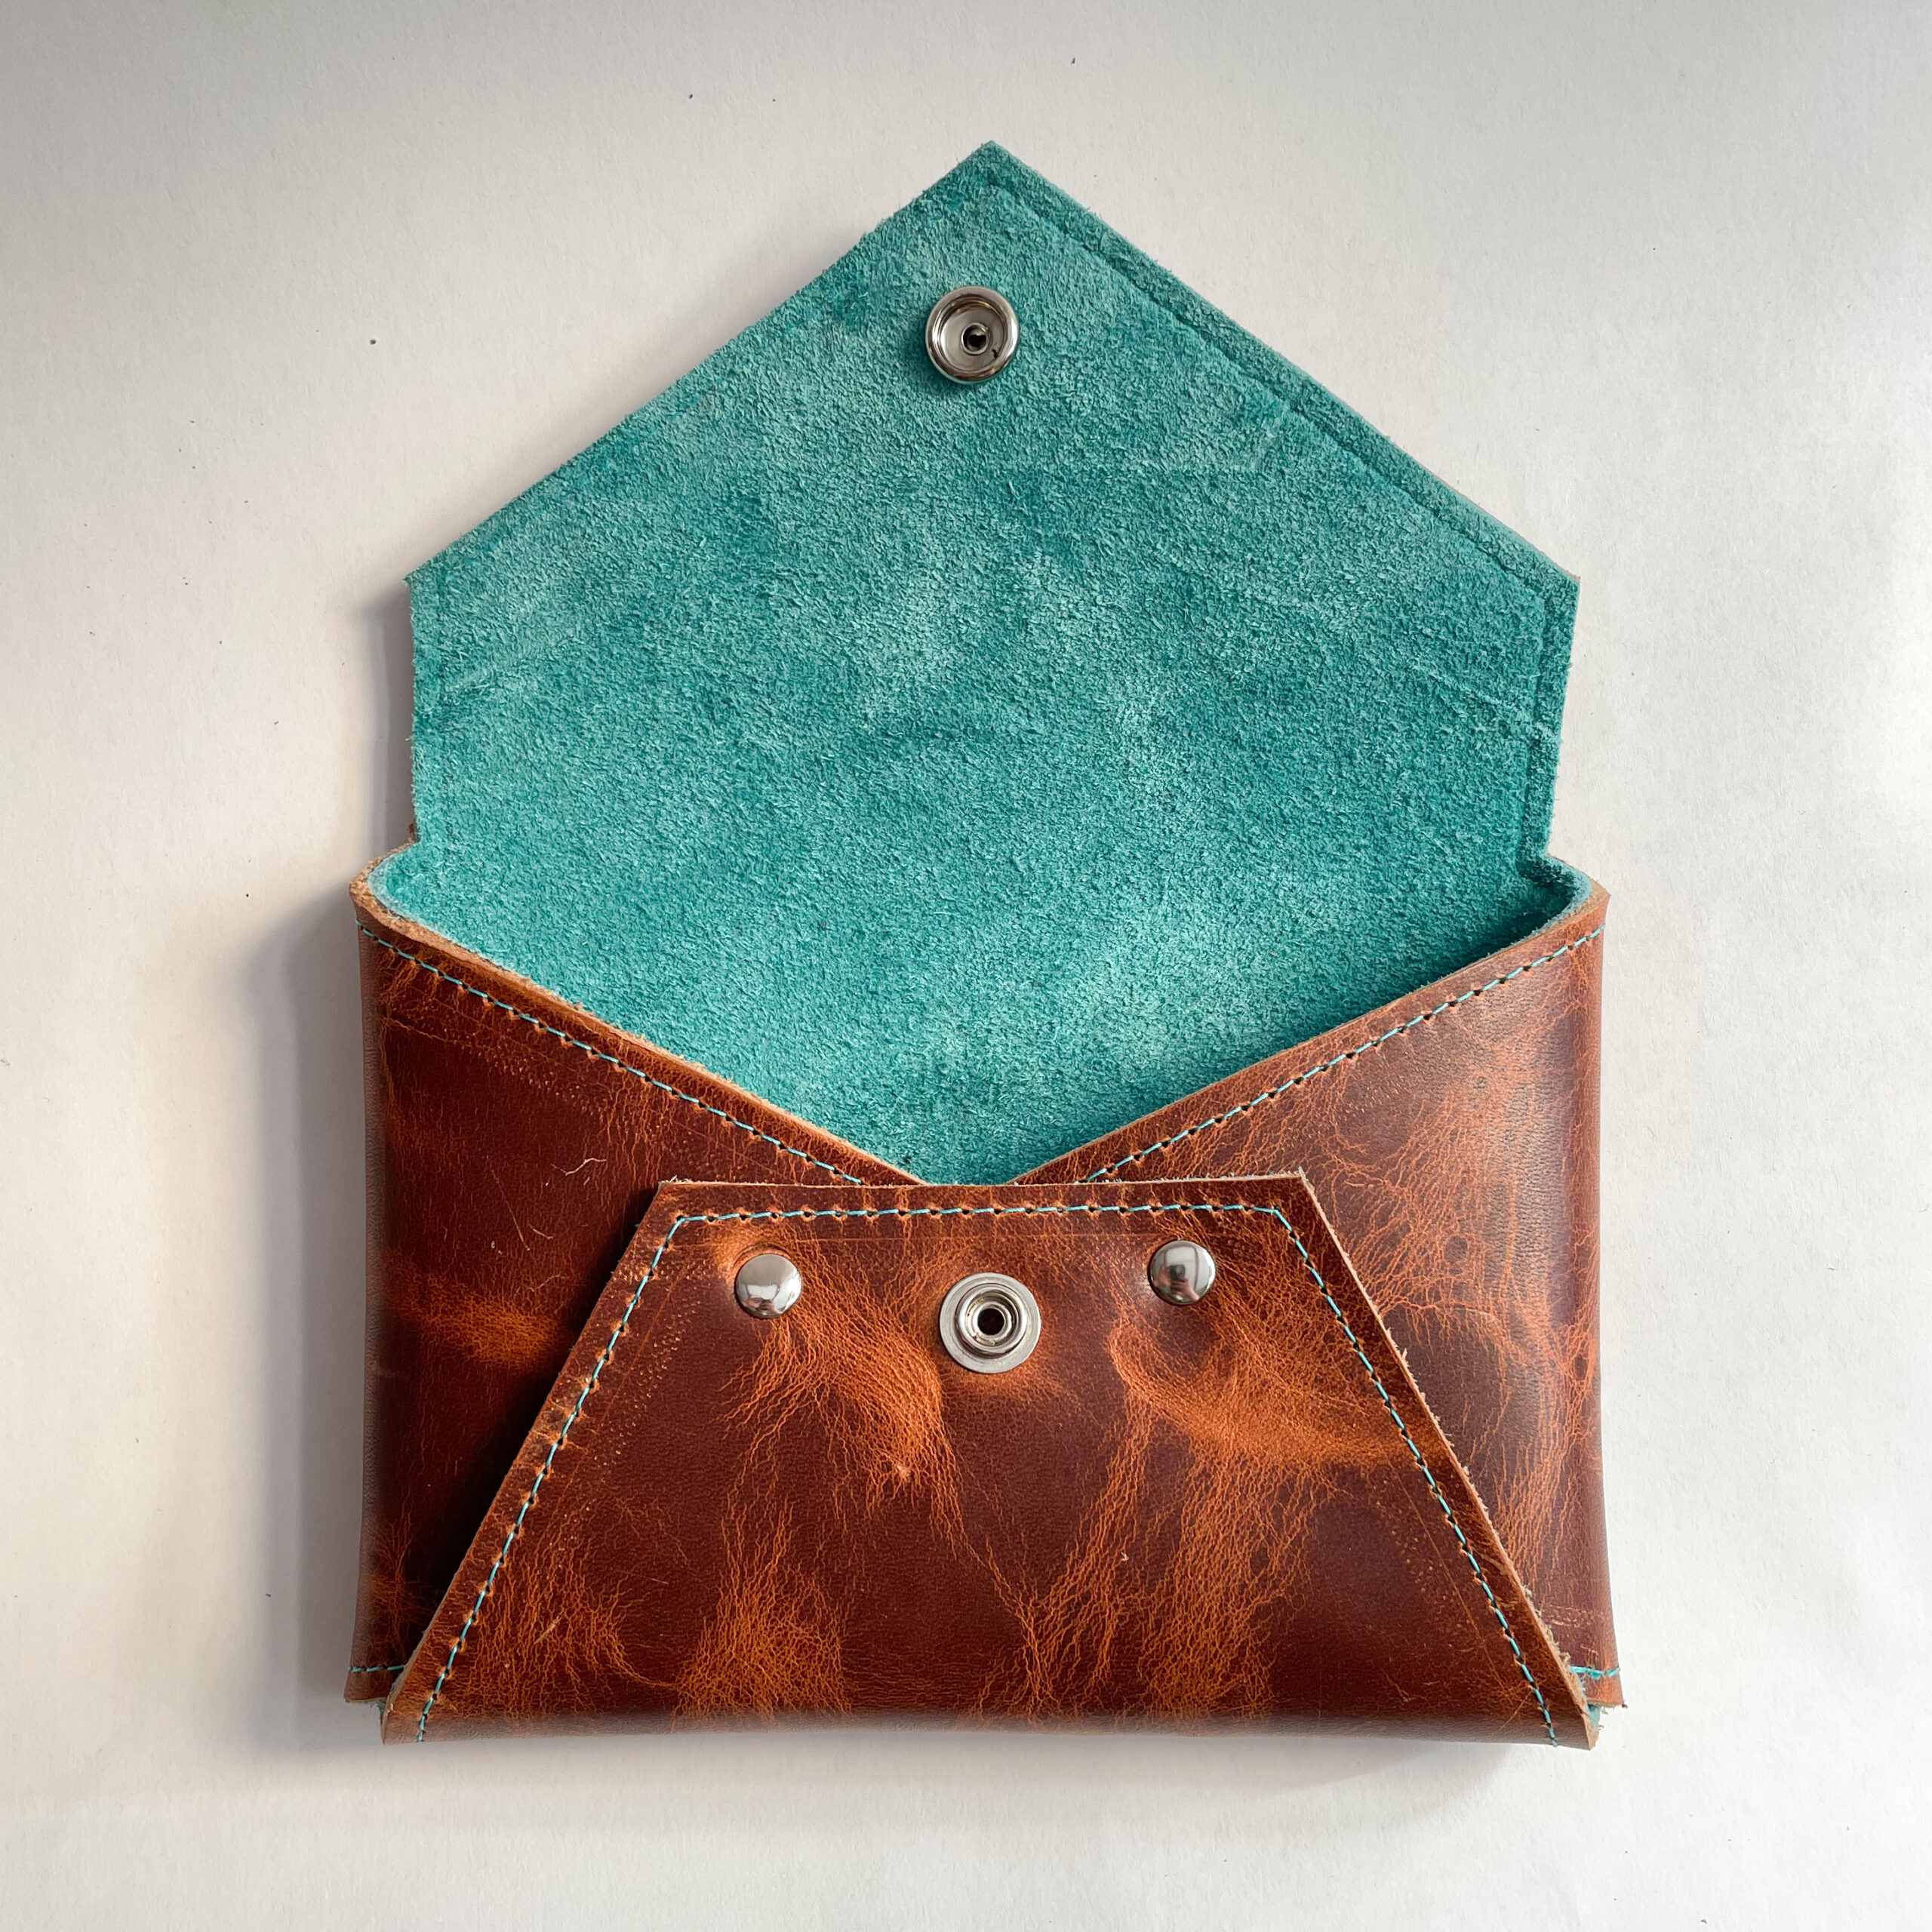 Open leather envelope clutch with teal lining